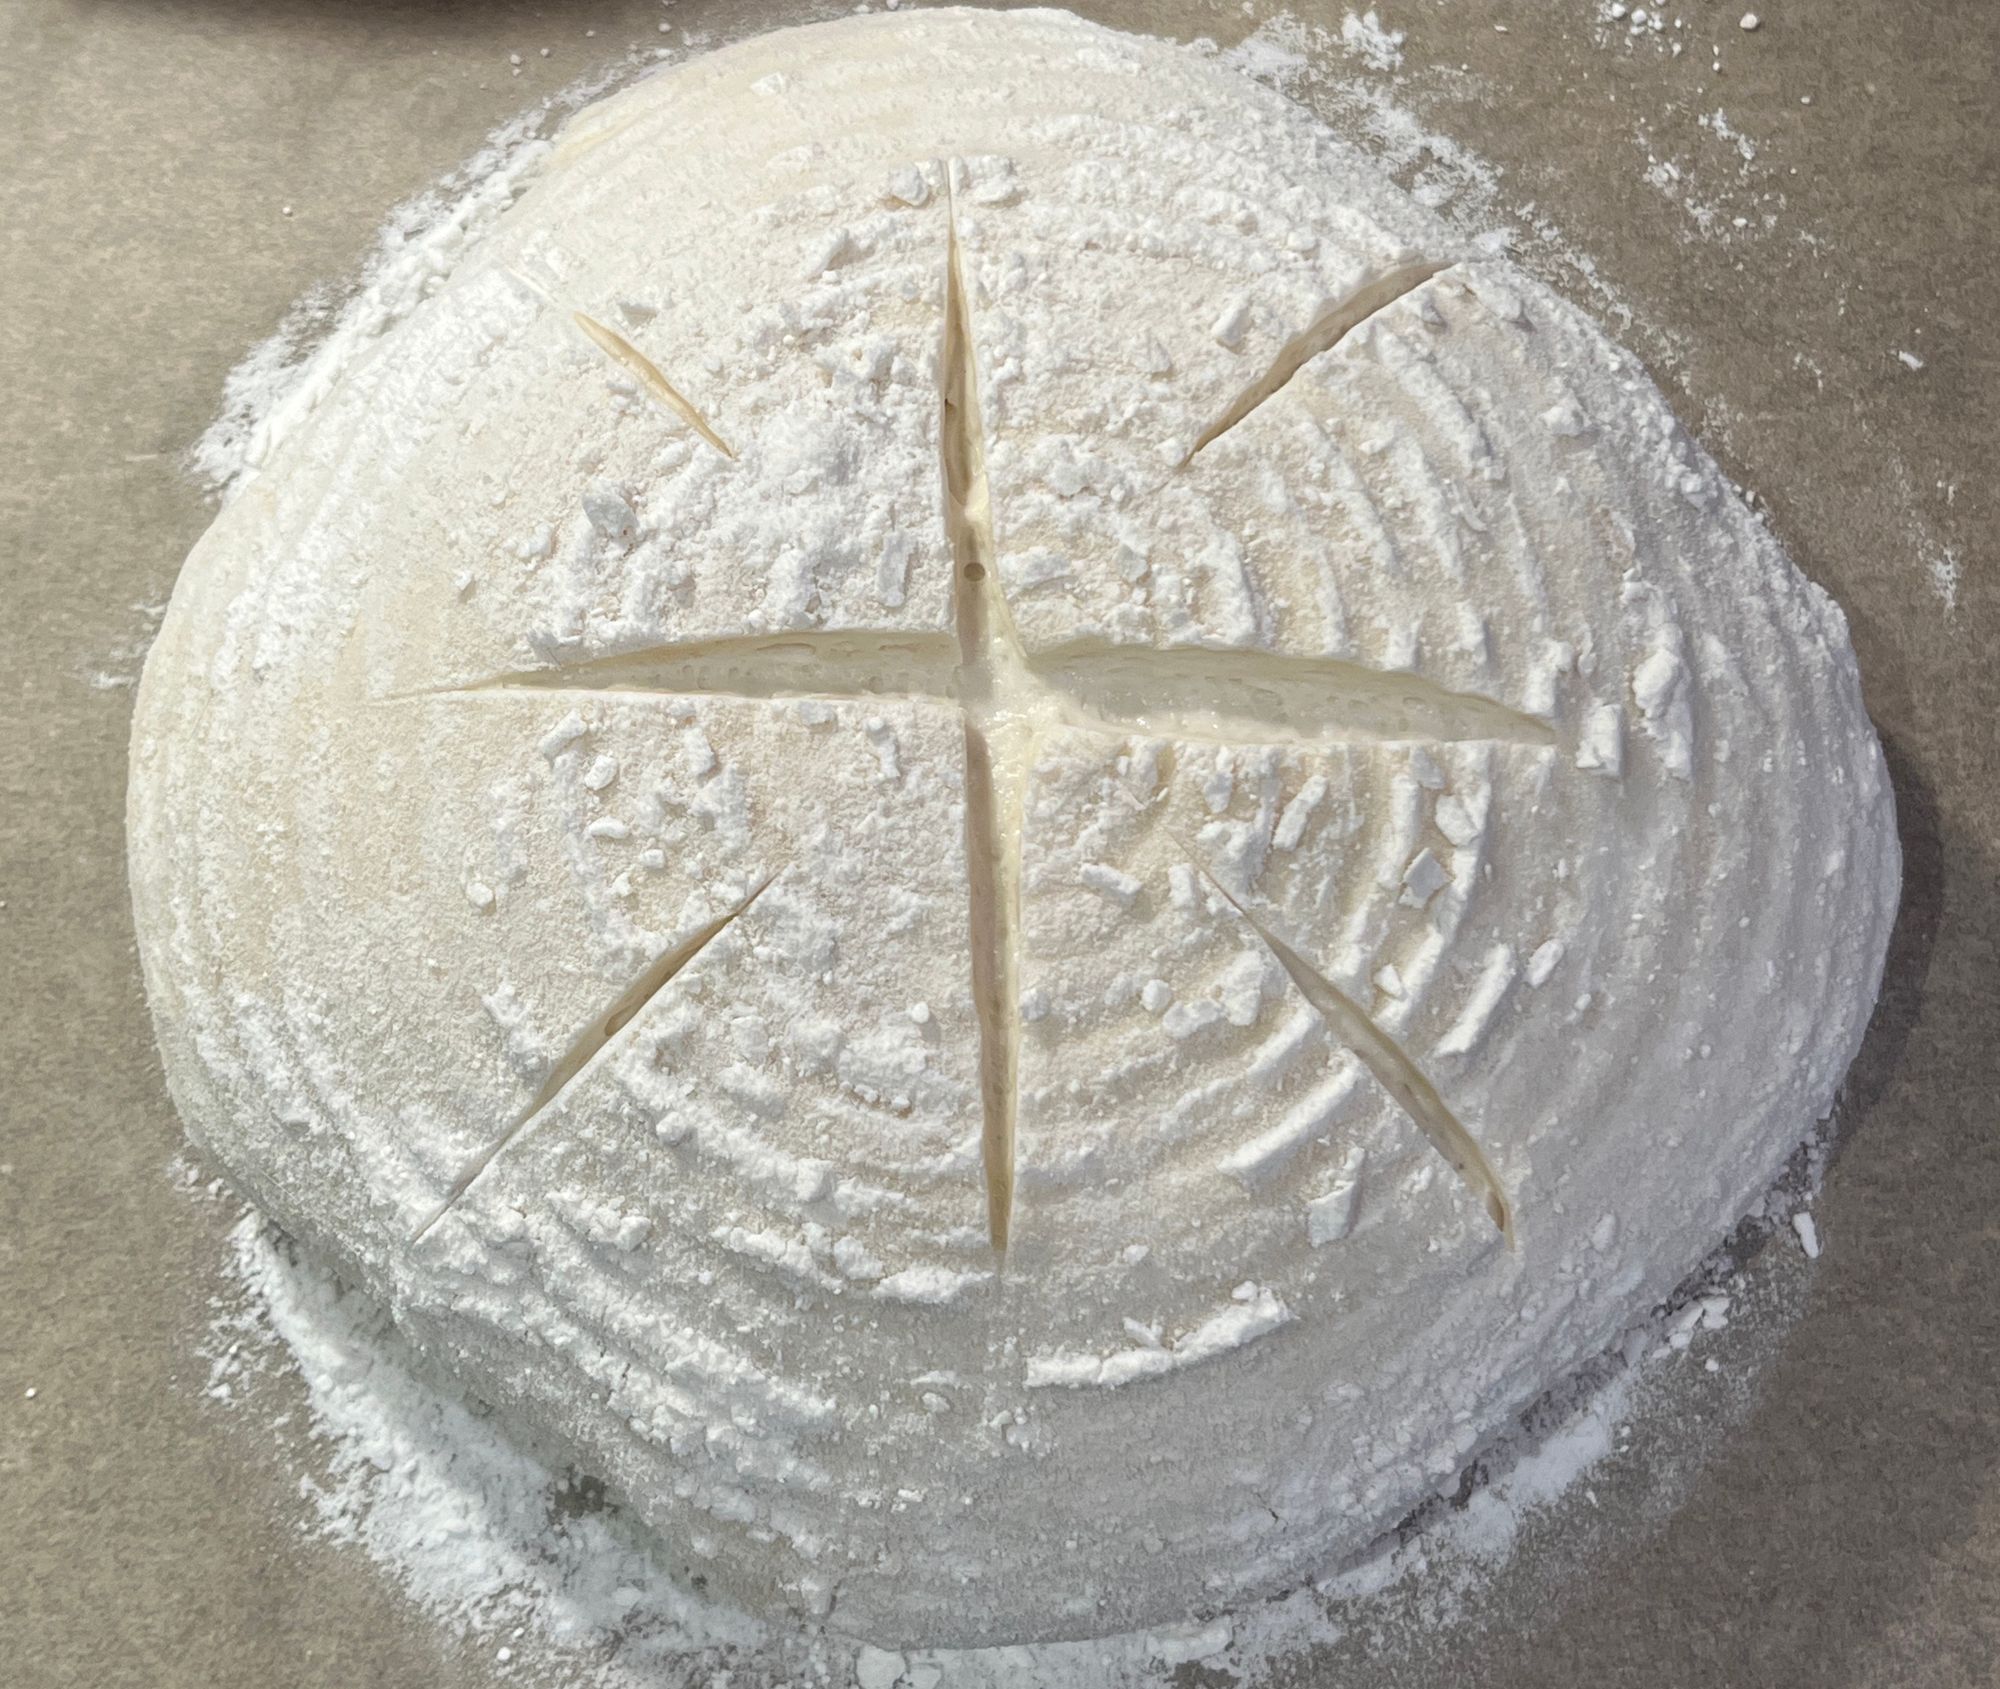 A sourdough boule ready to be baked, marked with concentric flour rings from the proofing basket and slashed in the shape of a compass rose or four-pointed star with smaller diagonal marks pointing into its corners.